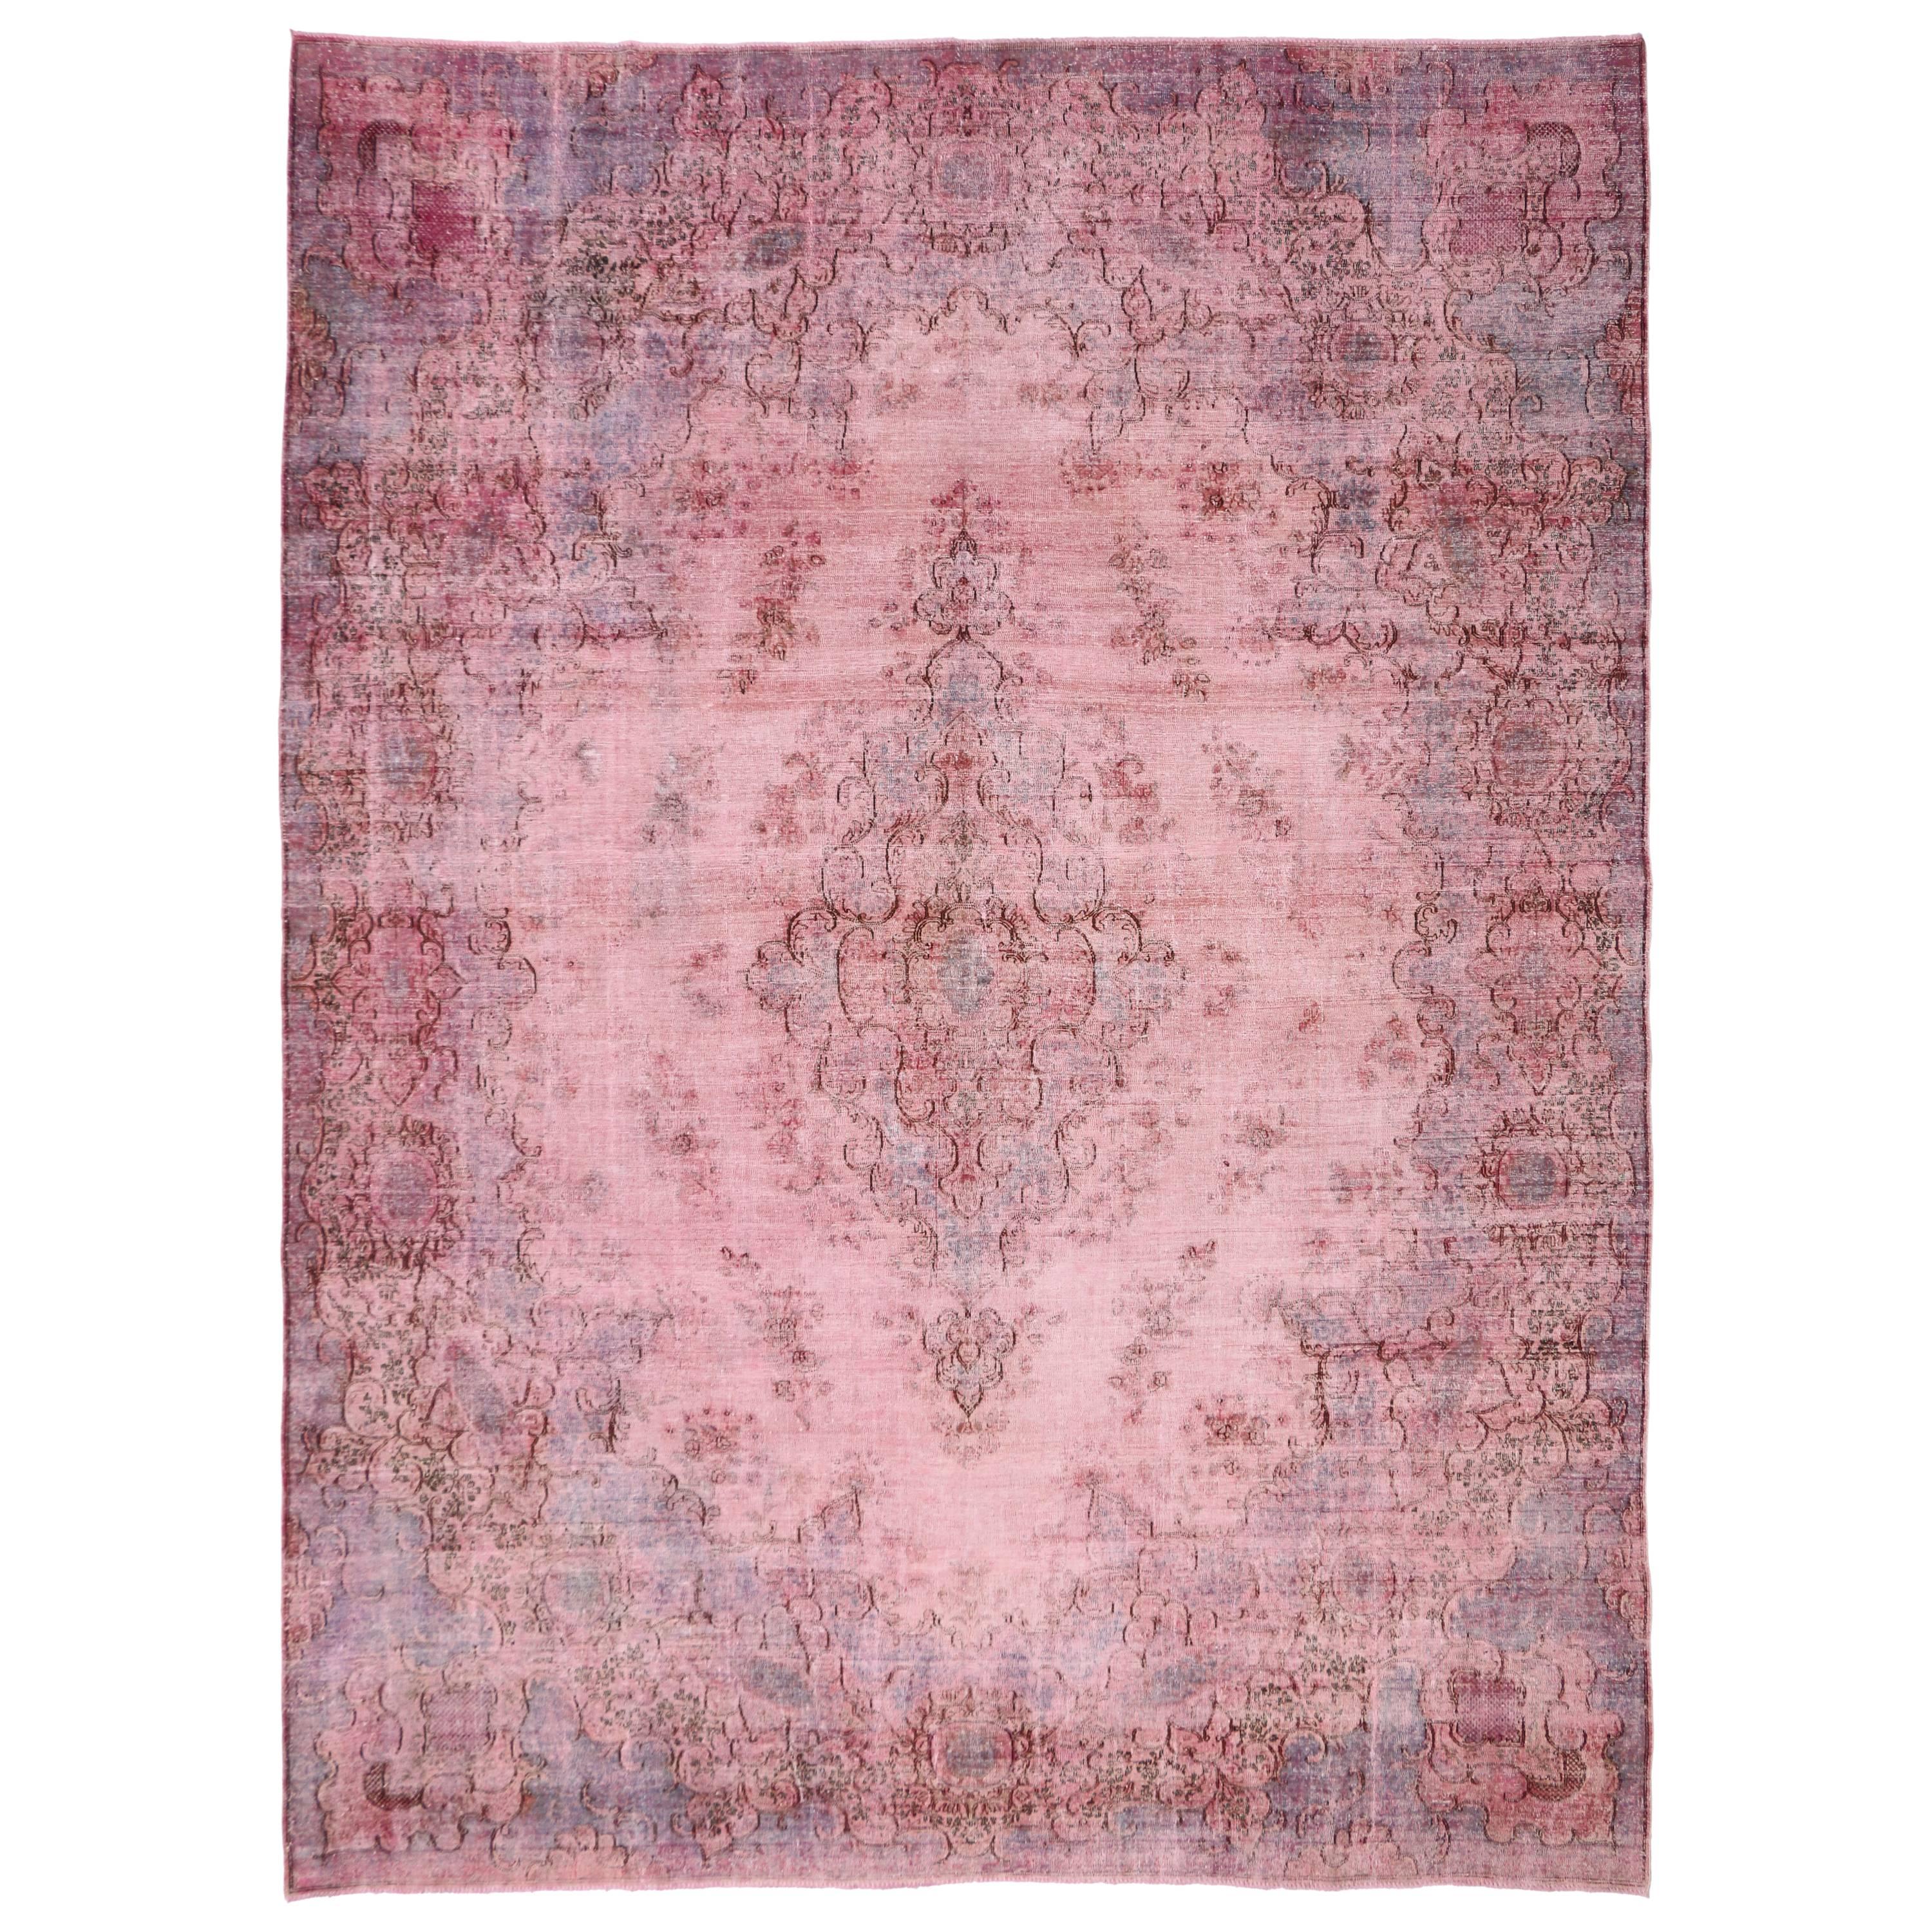 Distressed Pink Overdyed Vintage Persian Rug with Modern Industrial Style